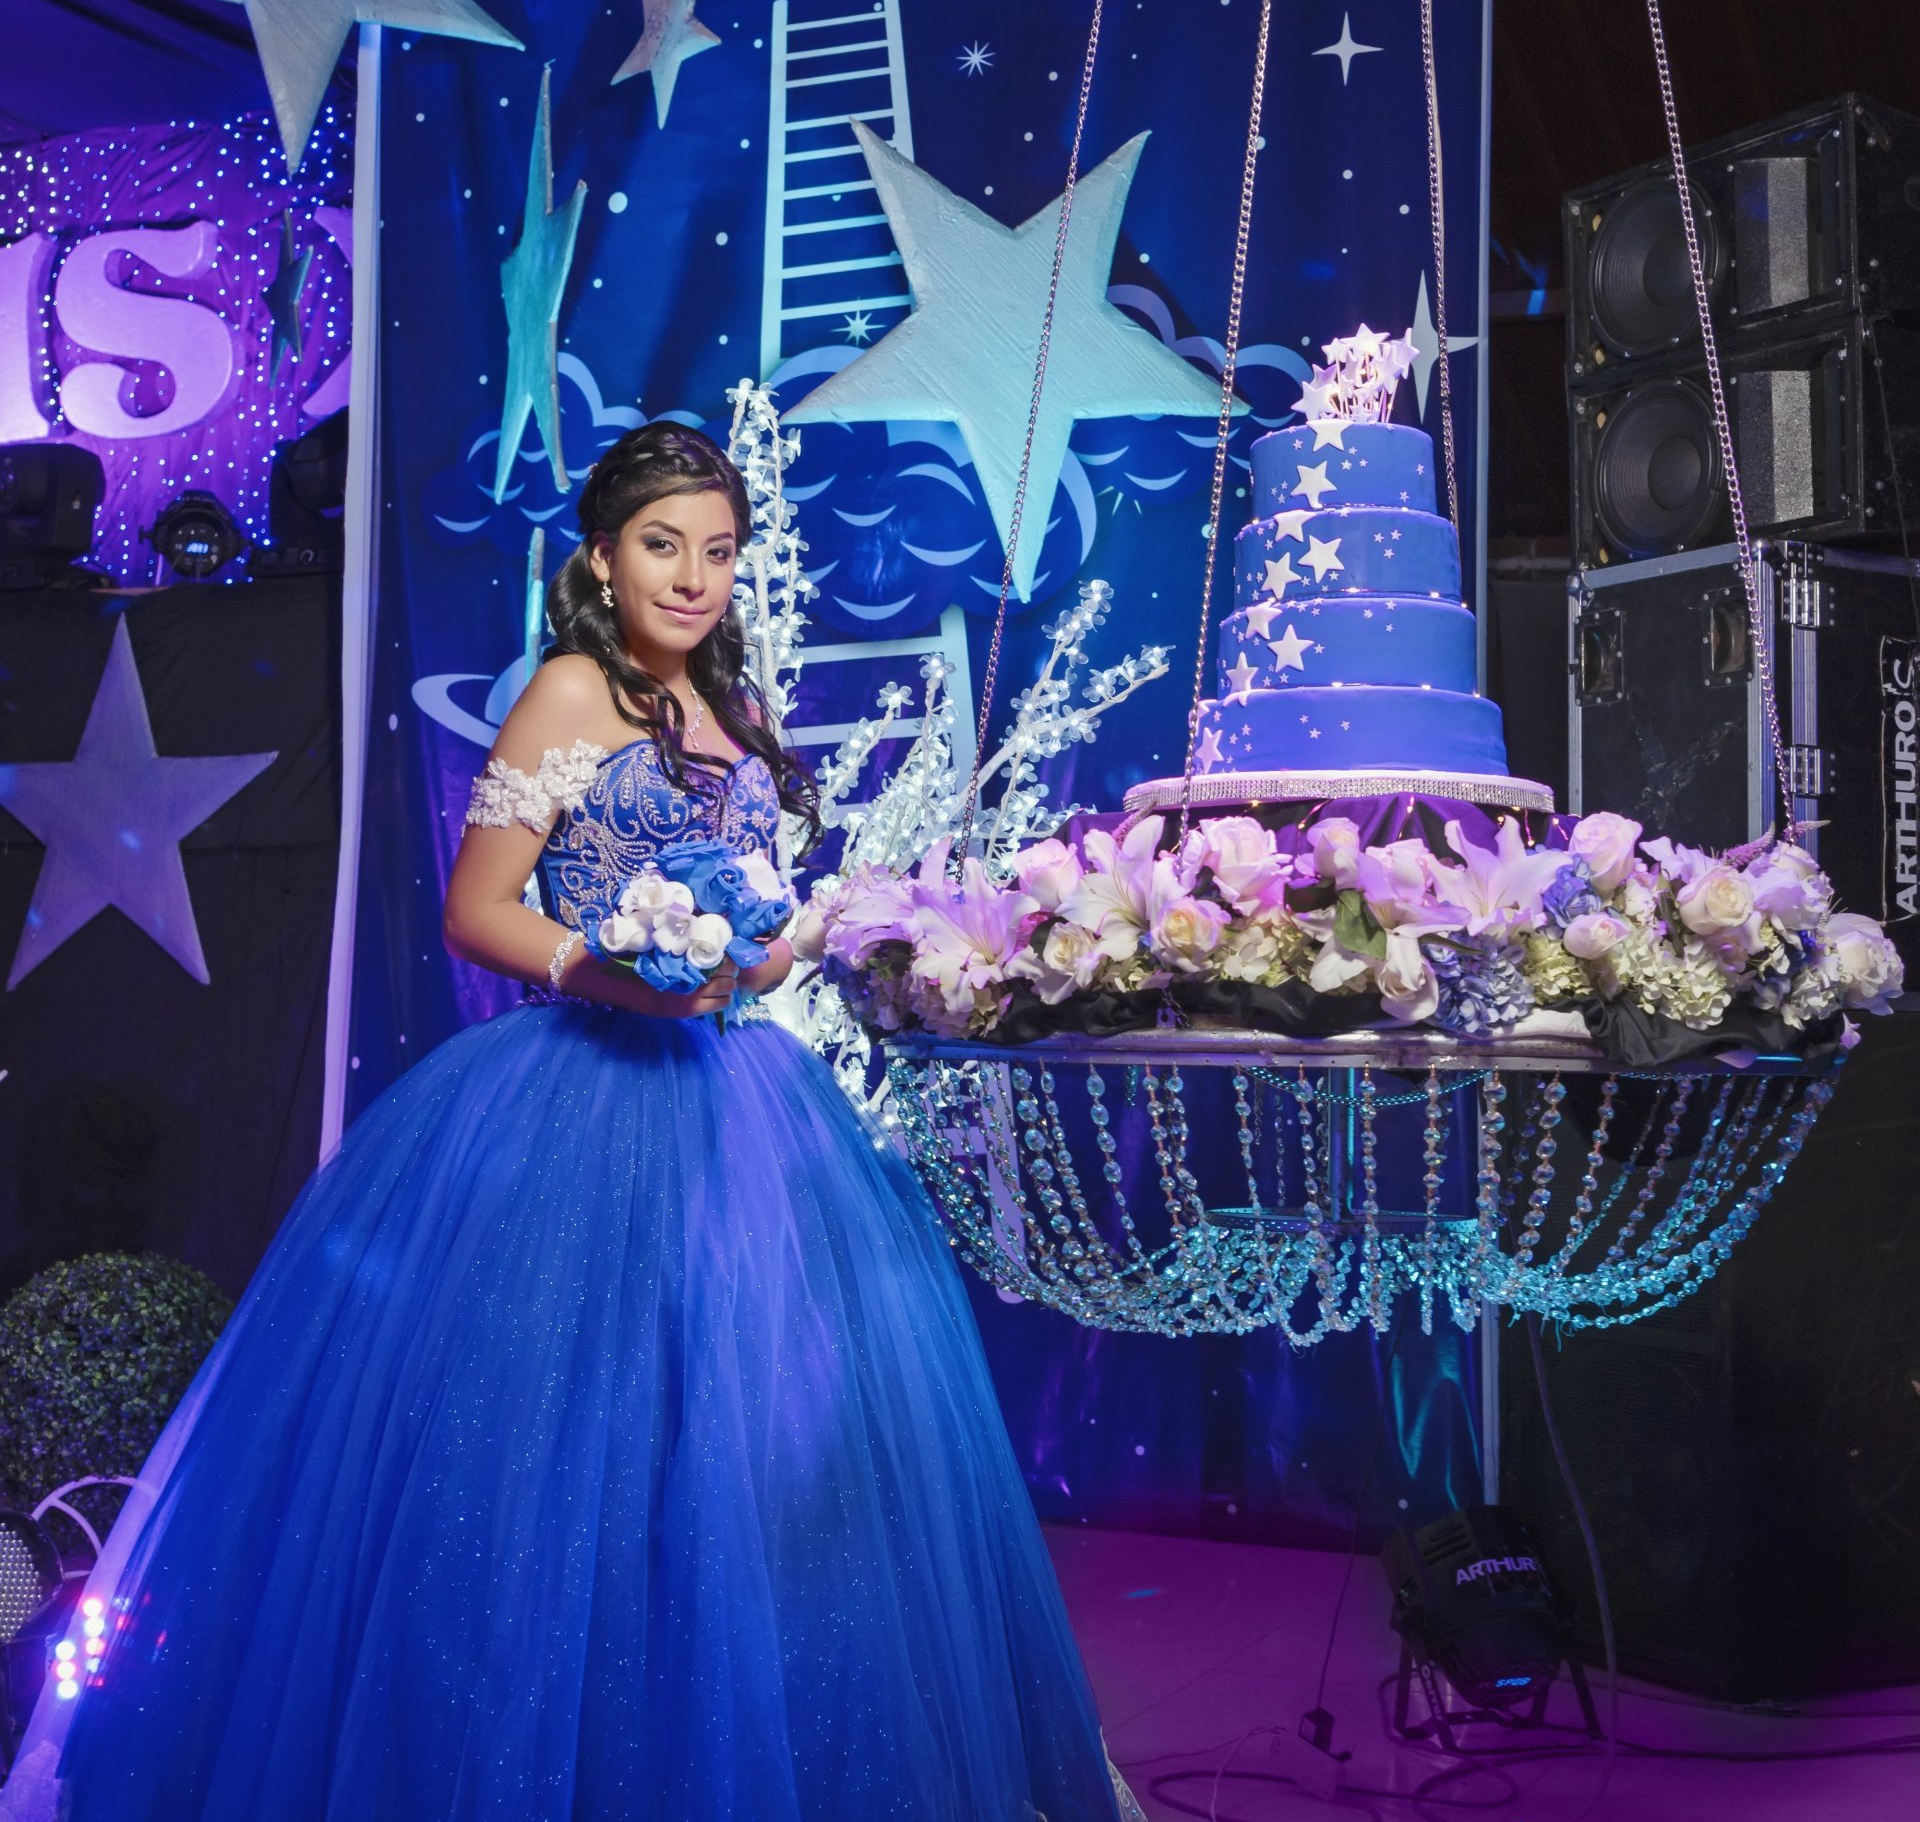 a girl wearing a blue dress standing next to a giant blue cake for her quinceanera celebration party in Austin